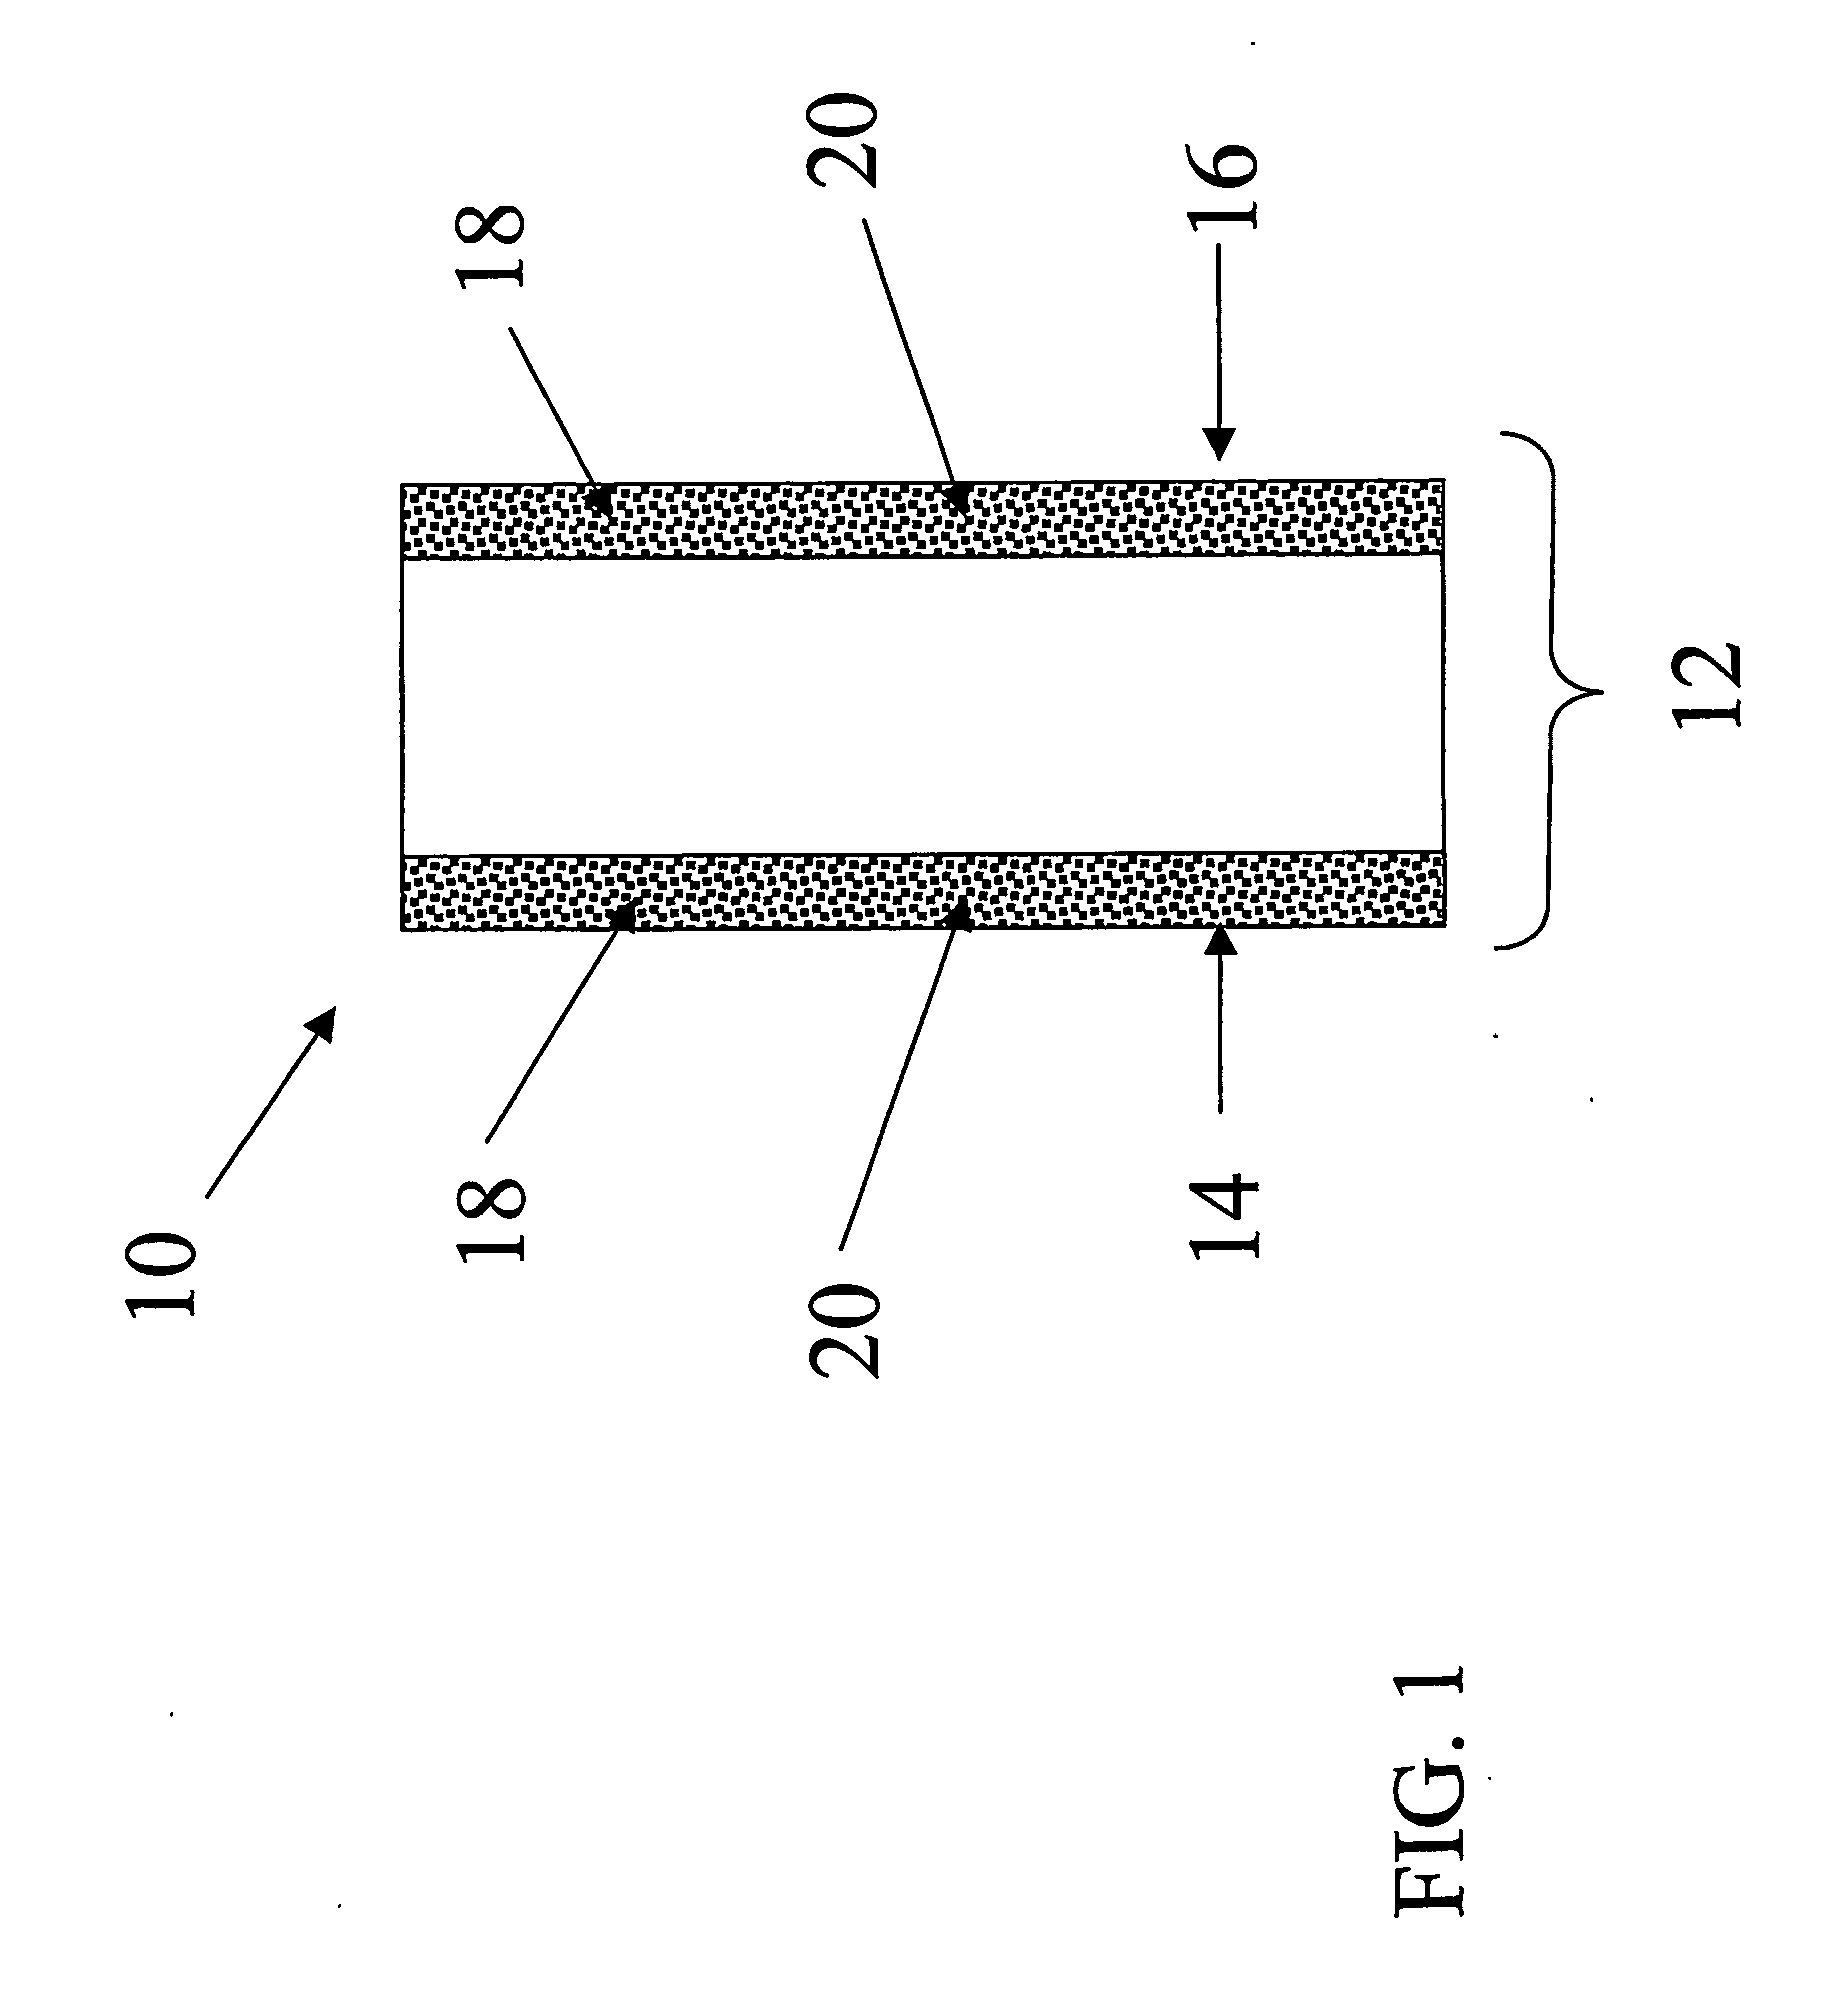 Sulfonated polymer composition for forming fuel cell electrodes